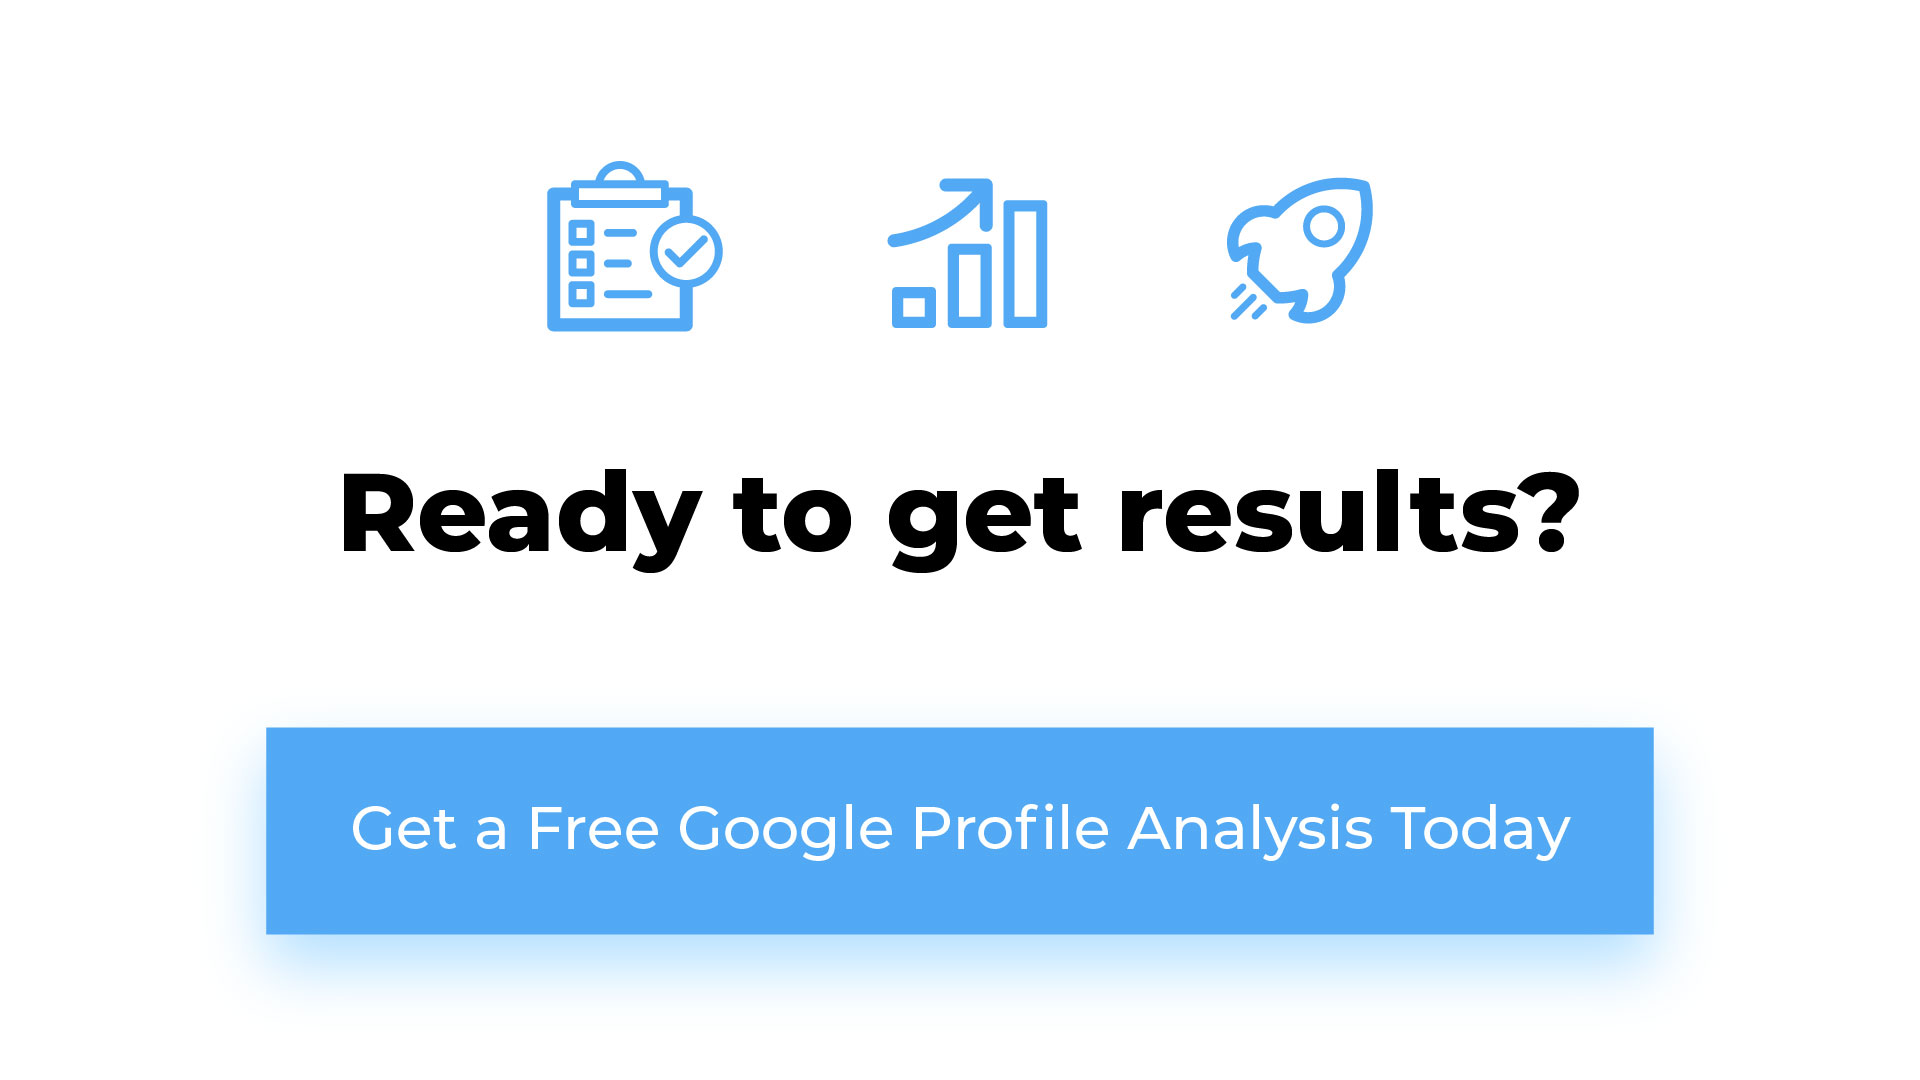 Ready to get results? Get a free Google Profile analysis today